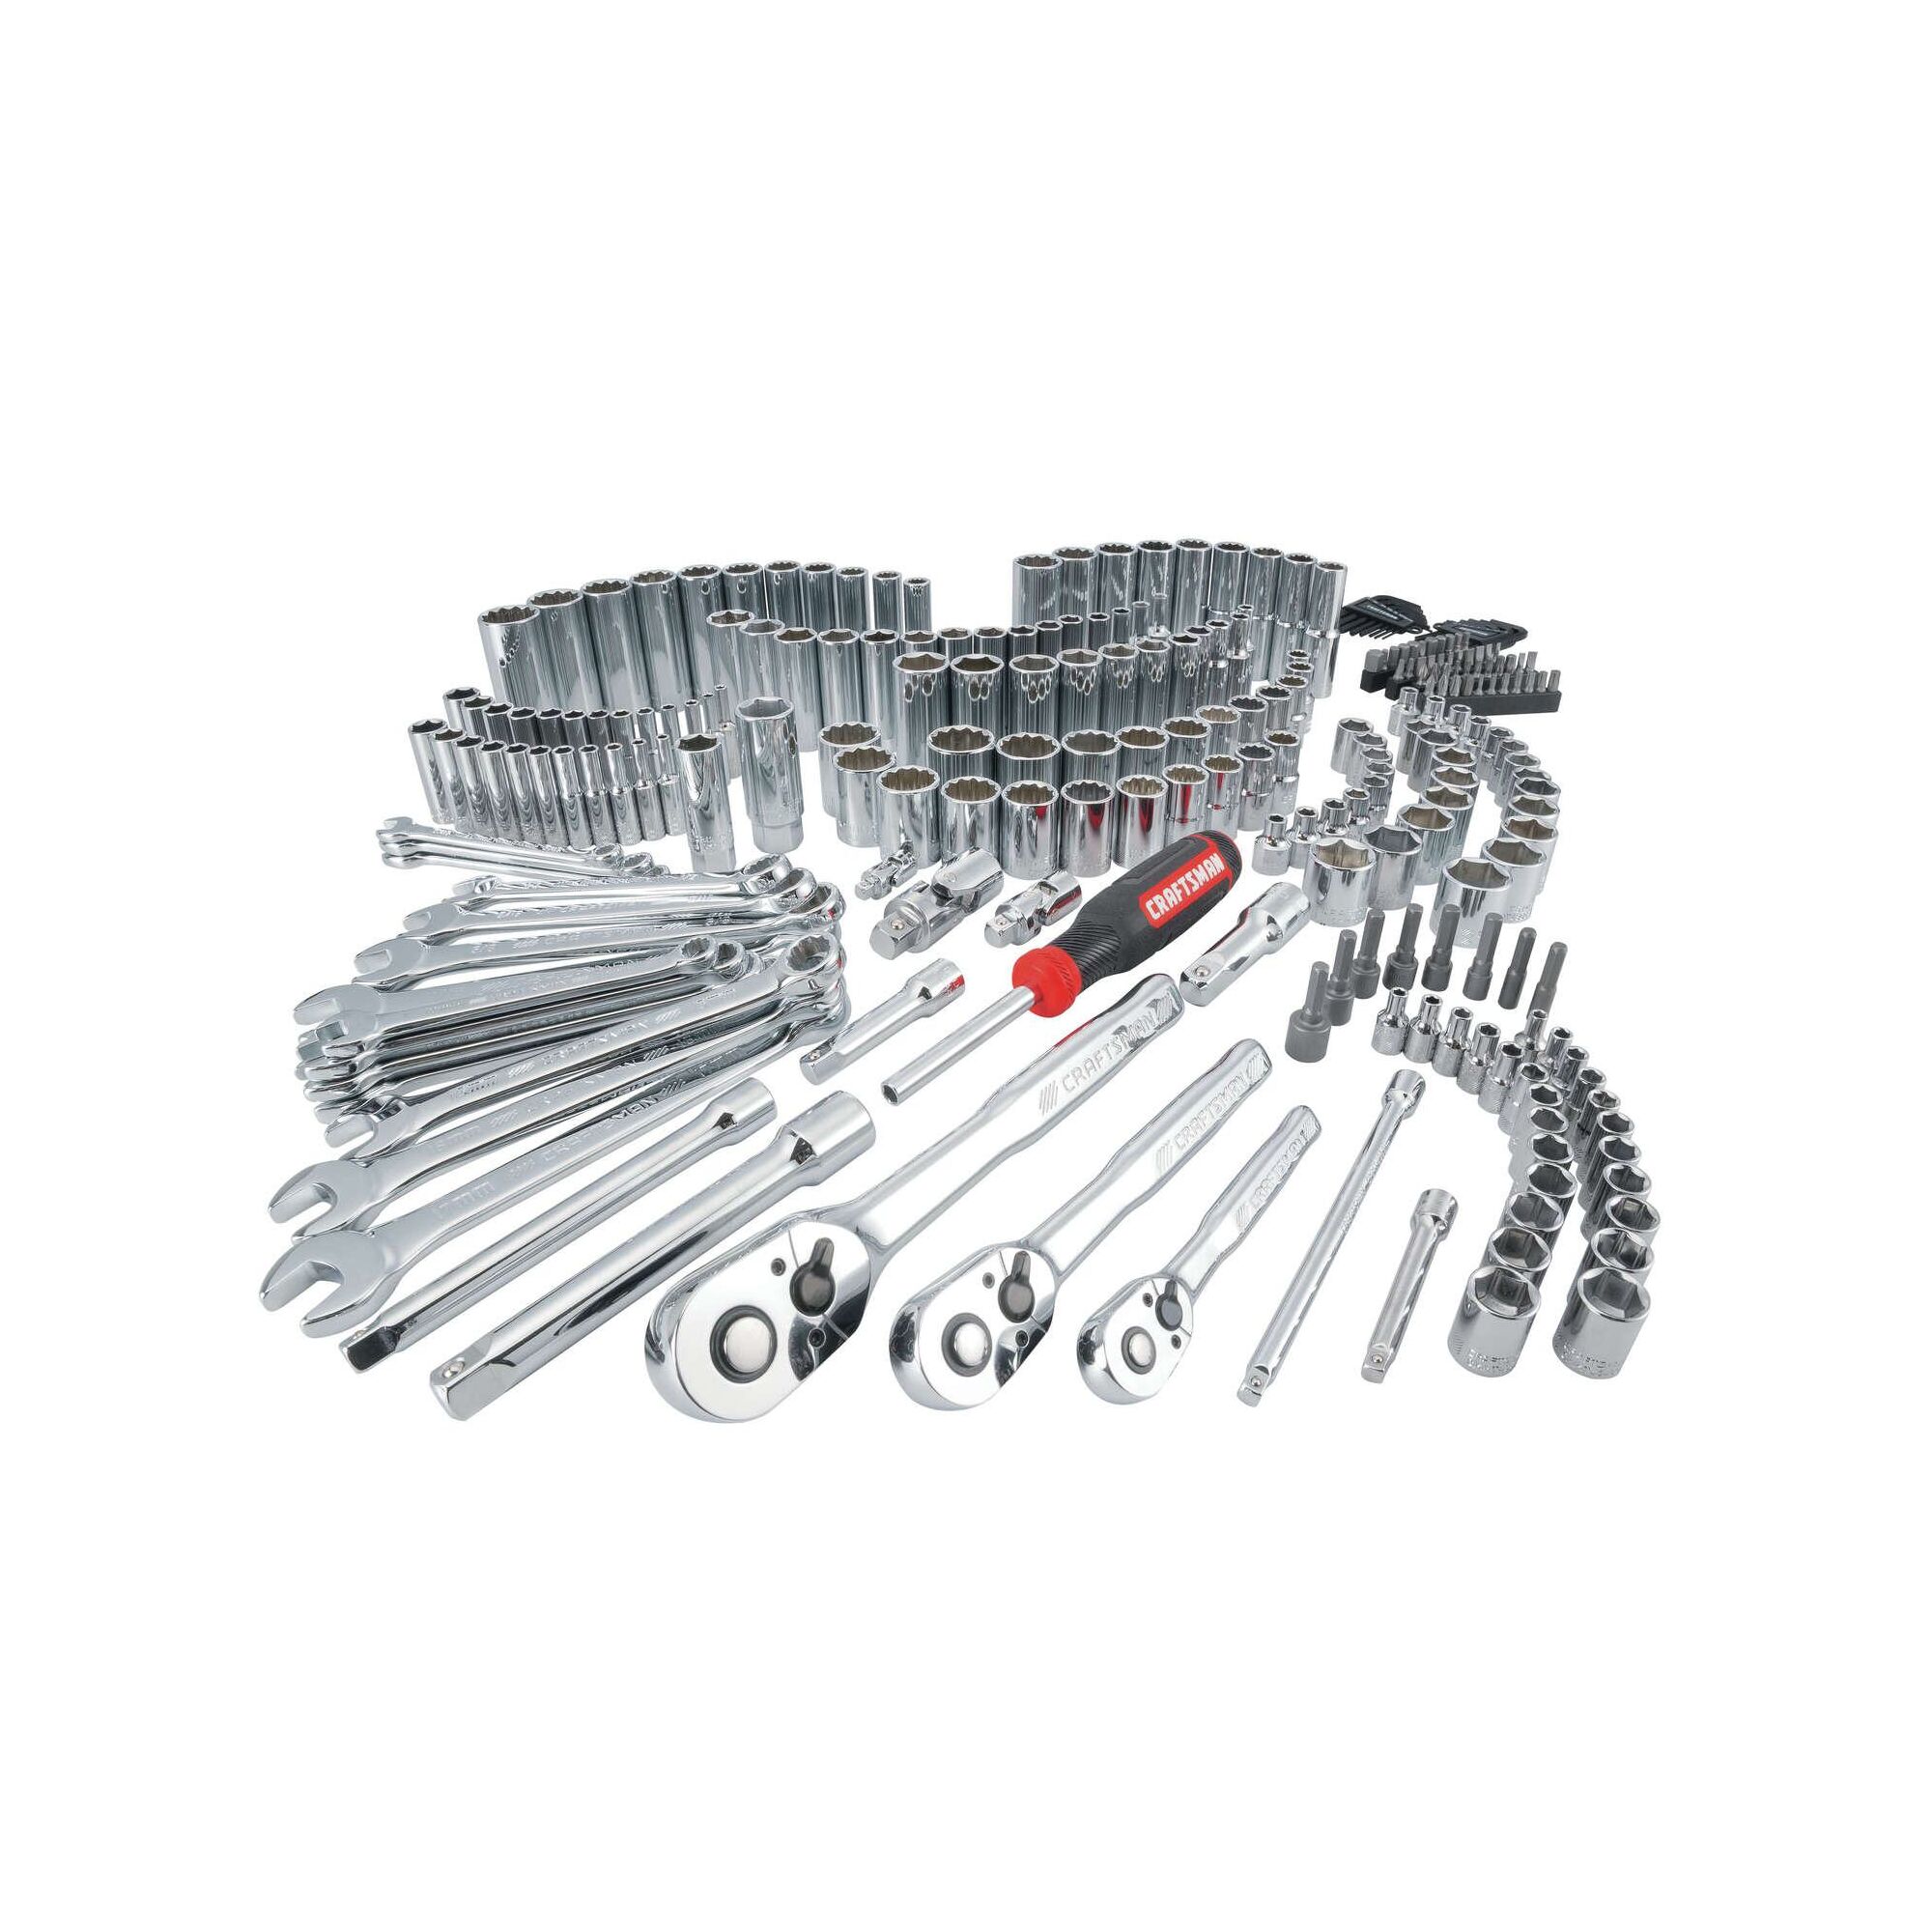 View of CRAFTSMAN Mechanics Tool Set family of products